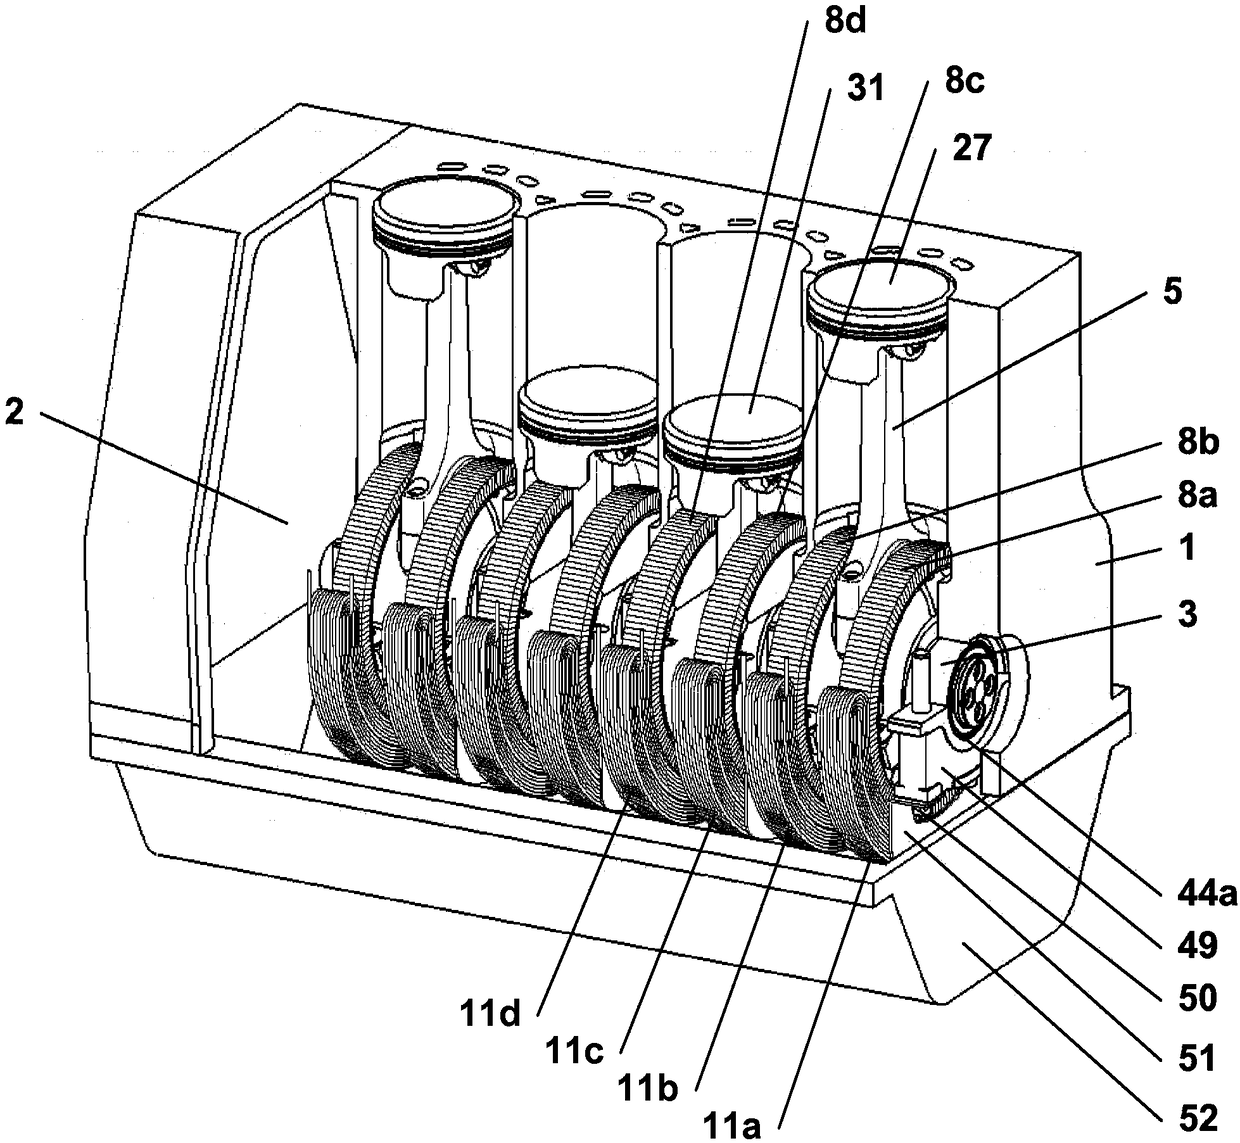 Systems with reciprocating piston engines